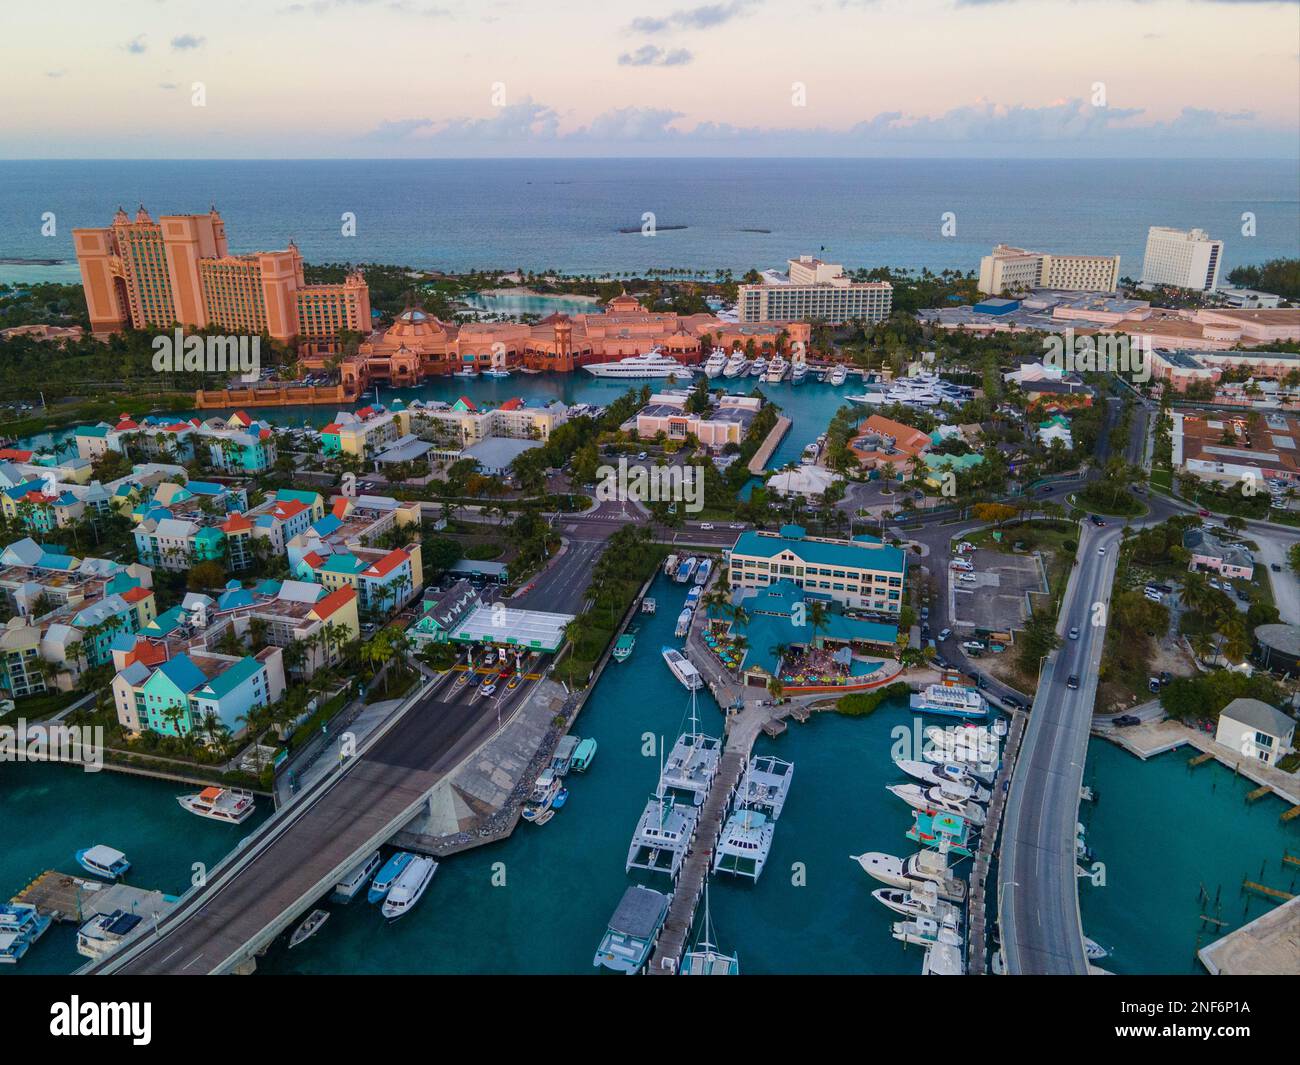 Harborside Villas aerial view at sunset with Atlantis Hotel at the background at Nassau Harbour, from Paradise Island, Bahamas. Stock Photo